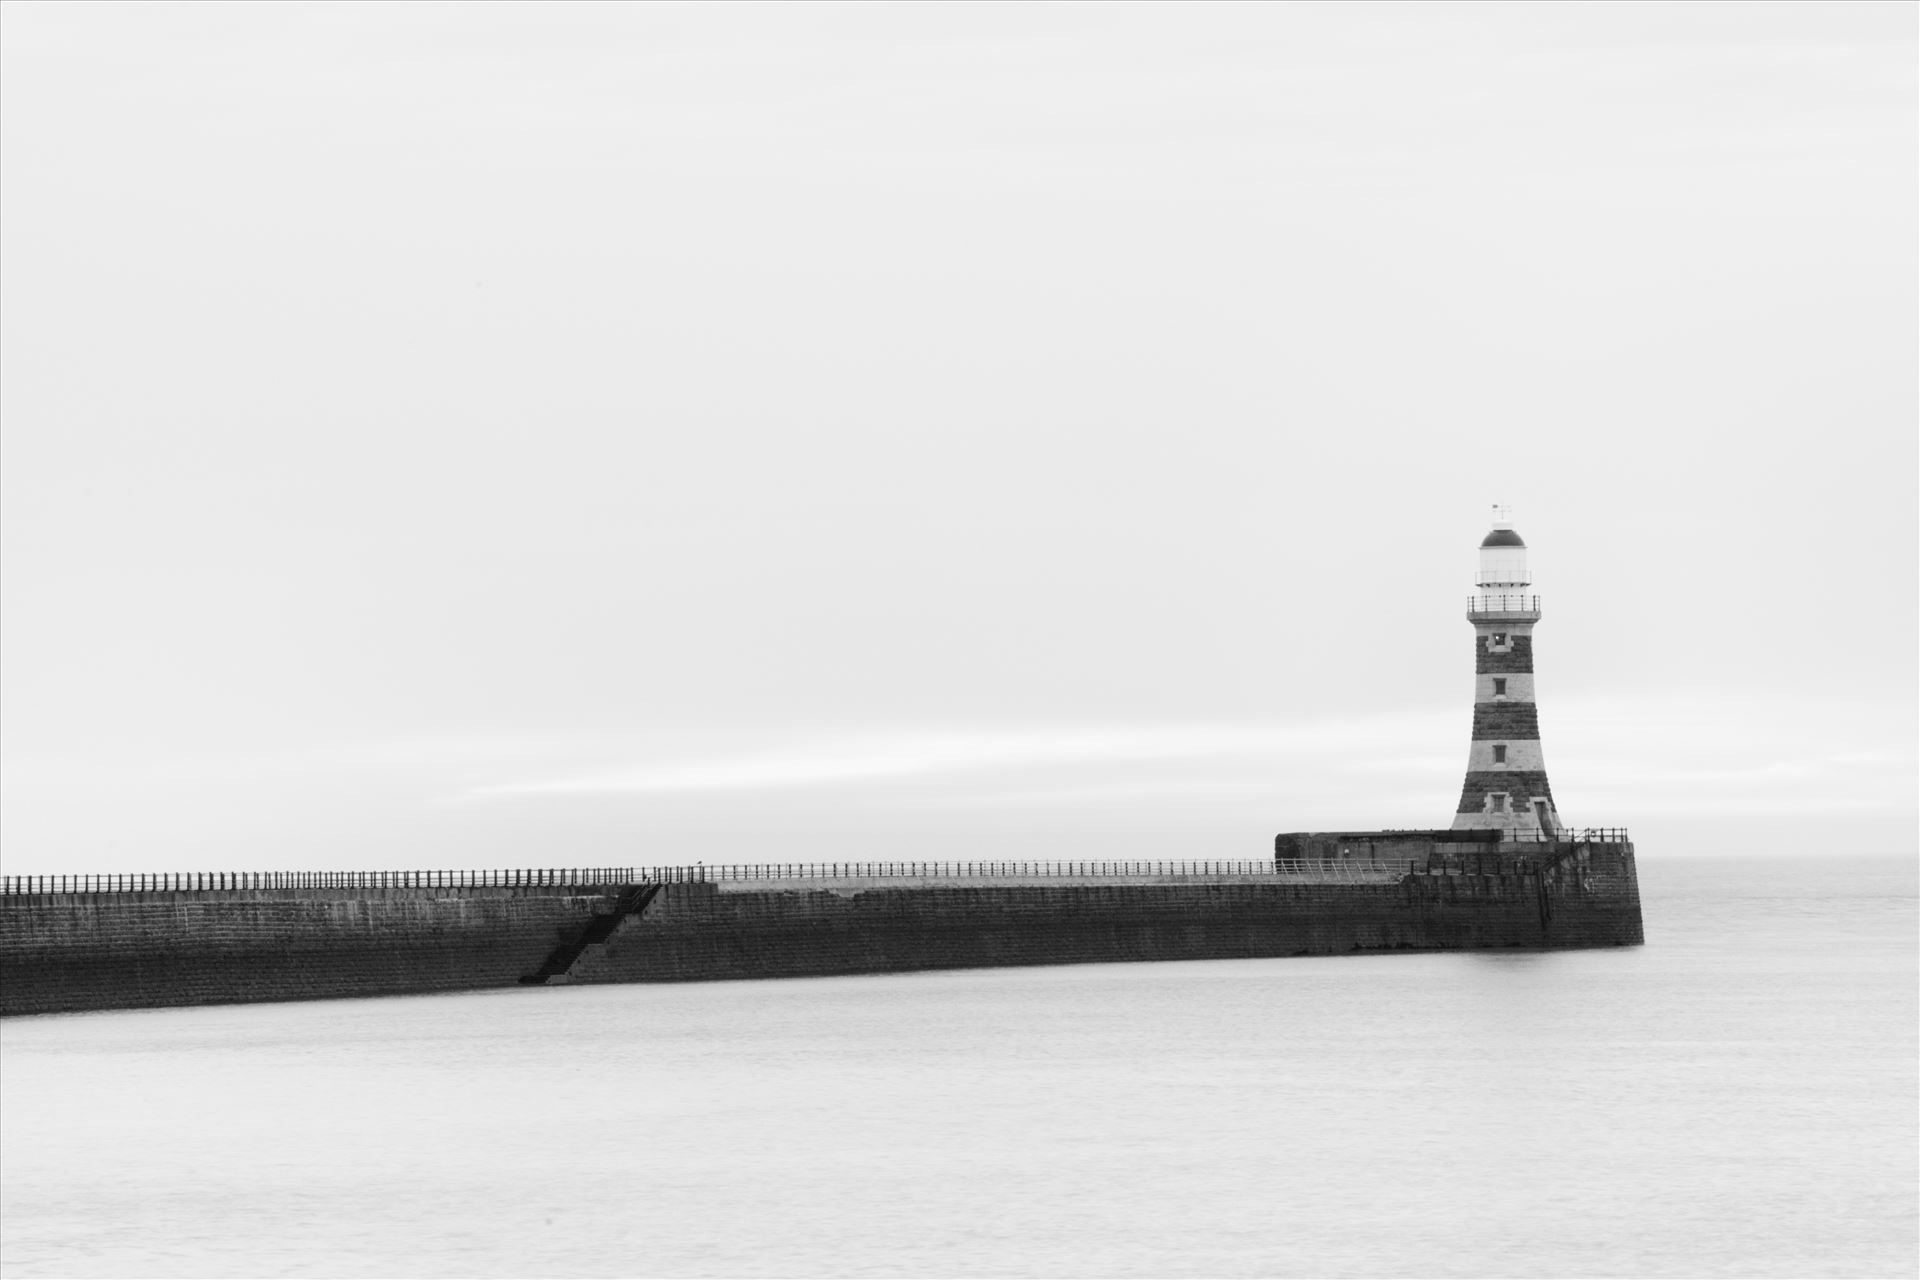 Roker Pier, Sunderland For over a hundred years, Roker Pier & Lighthouse has protected the entrance into Sunderland's harbour with the pier, and distinctive red and grey granite hoops of the lighthouse, as one of the City's most iconic landmarks. by philreay